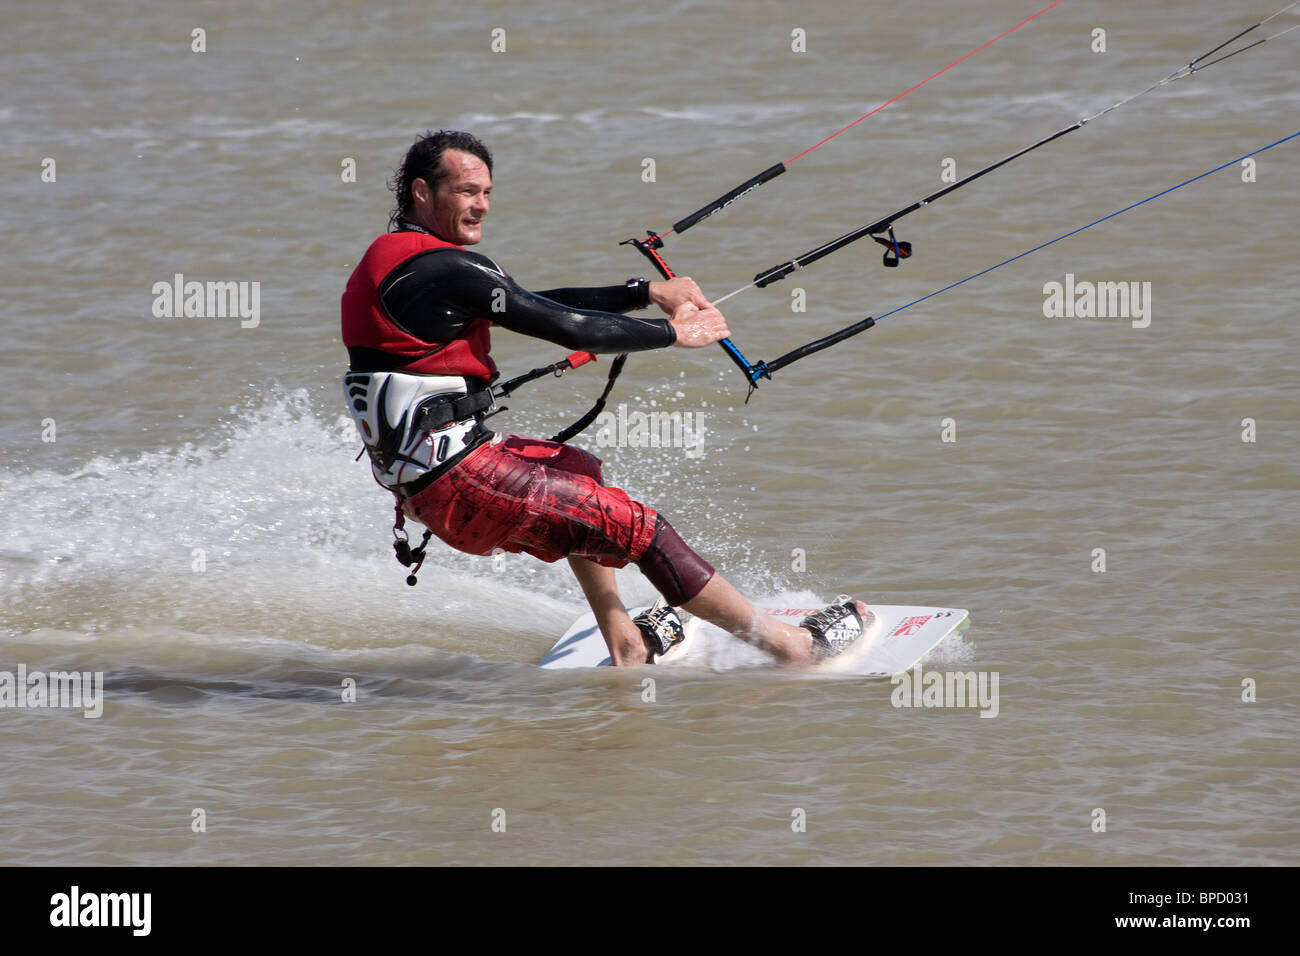 Richard Branson first kitesurfing kite surfing kiteboarding boarding  attempt ends due to high winds in the English Channel Stock Photo - Alamy